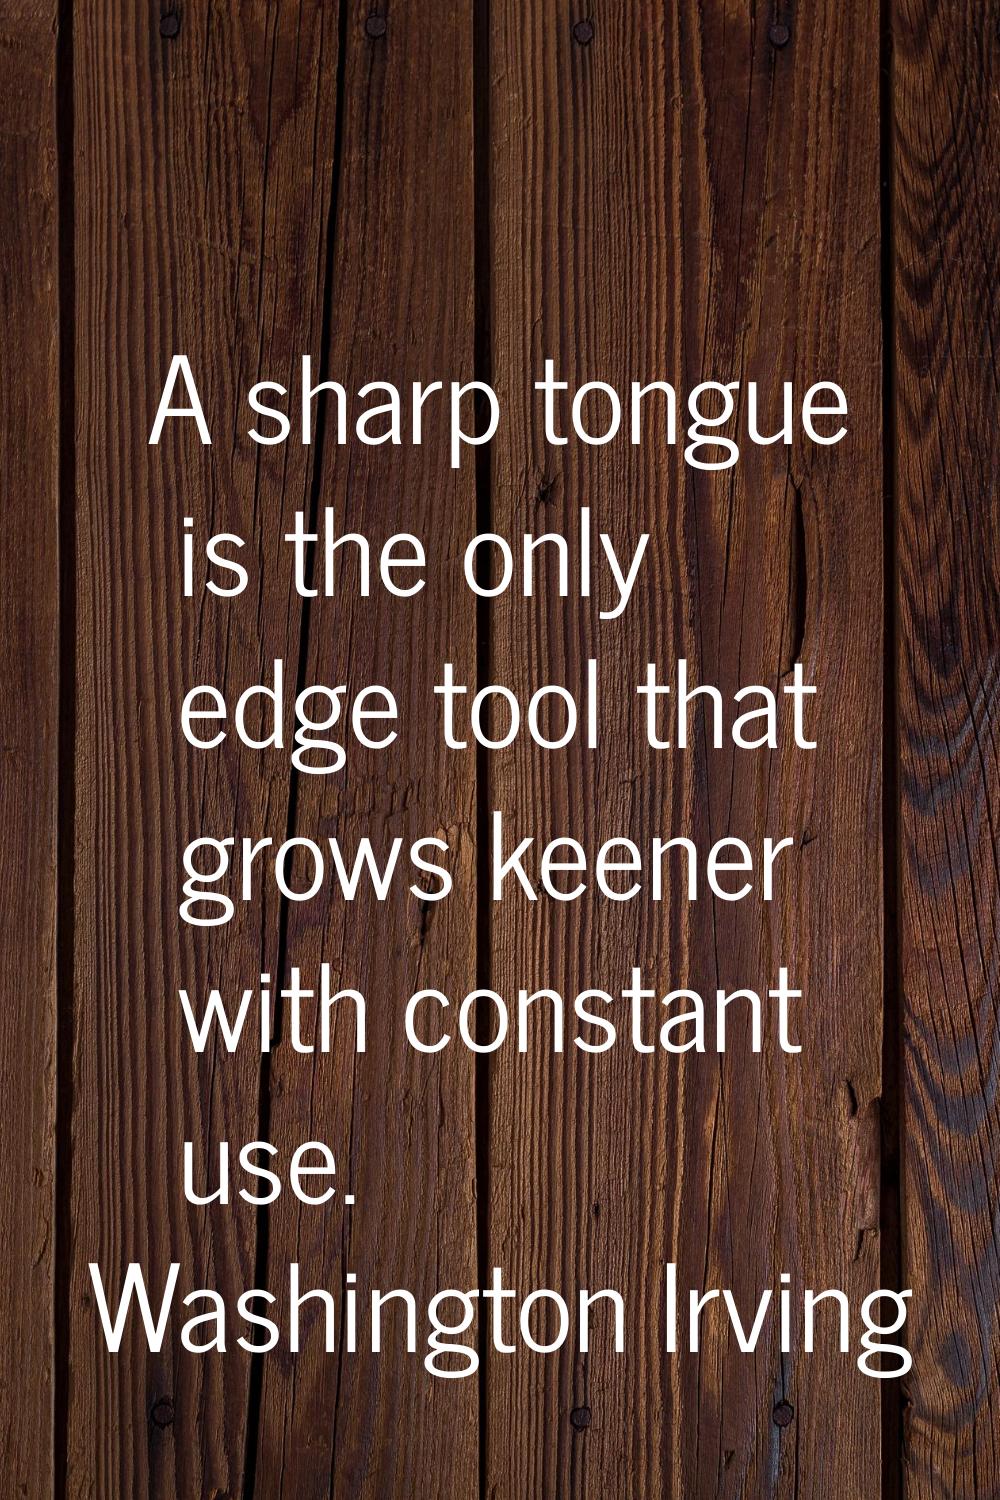 A sharp tongue is the only edge tool that grows keener with constant use.